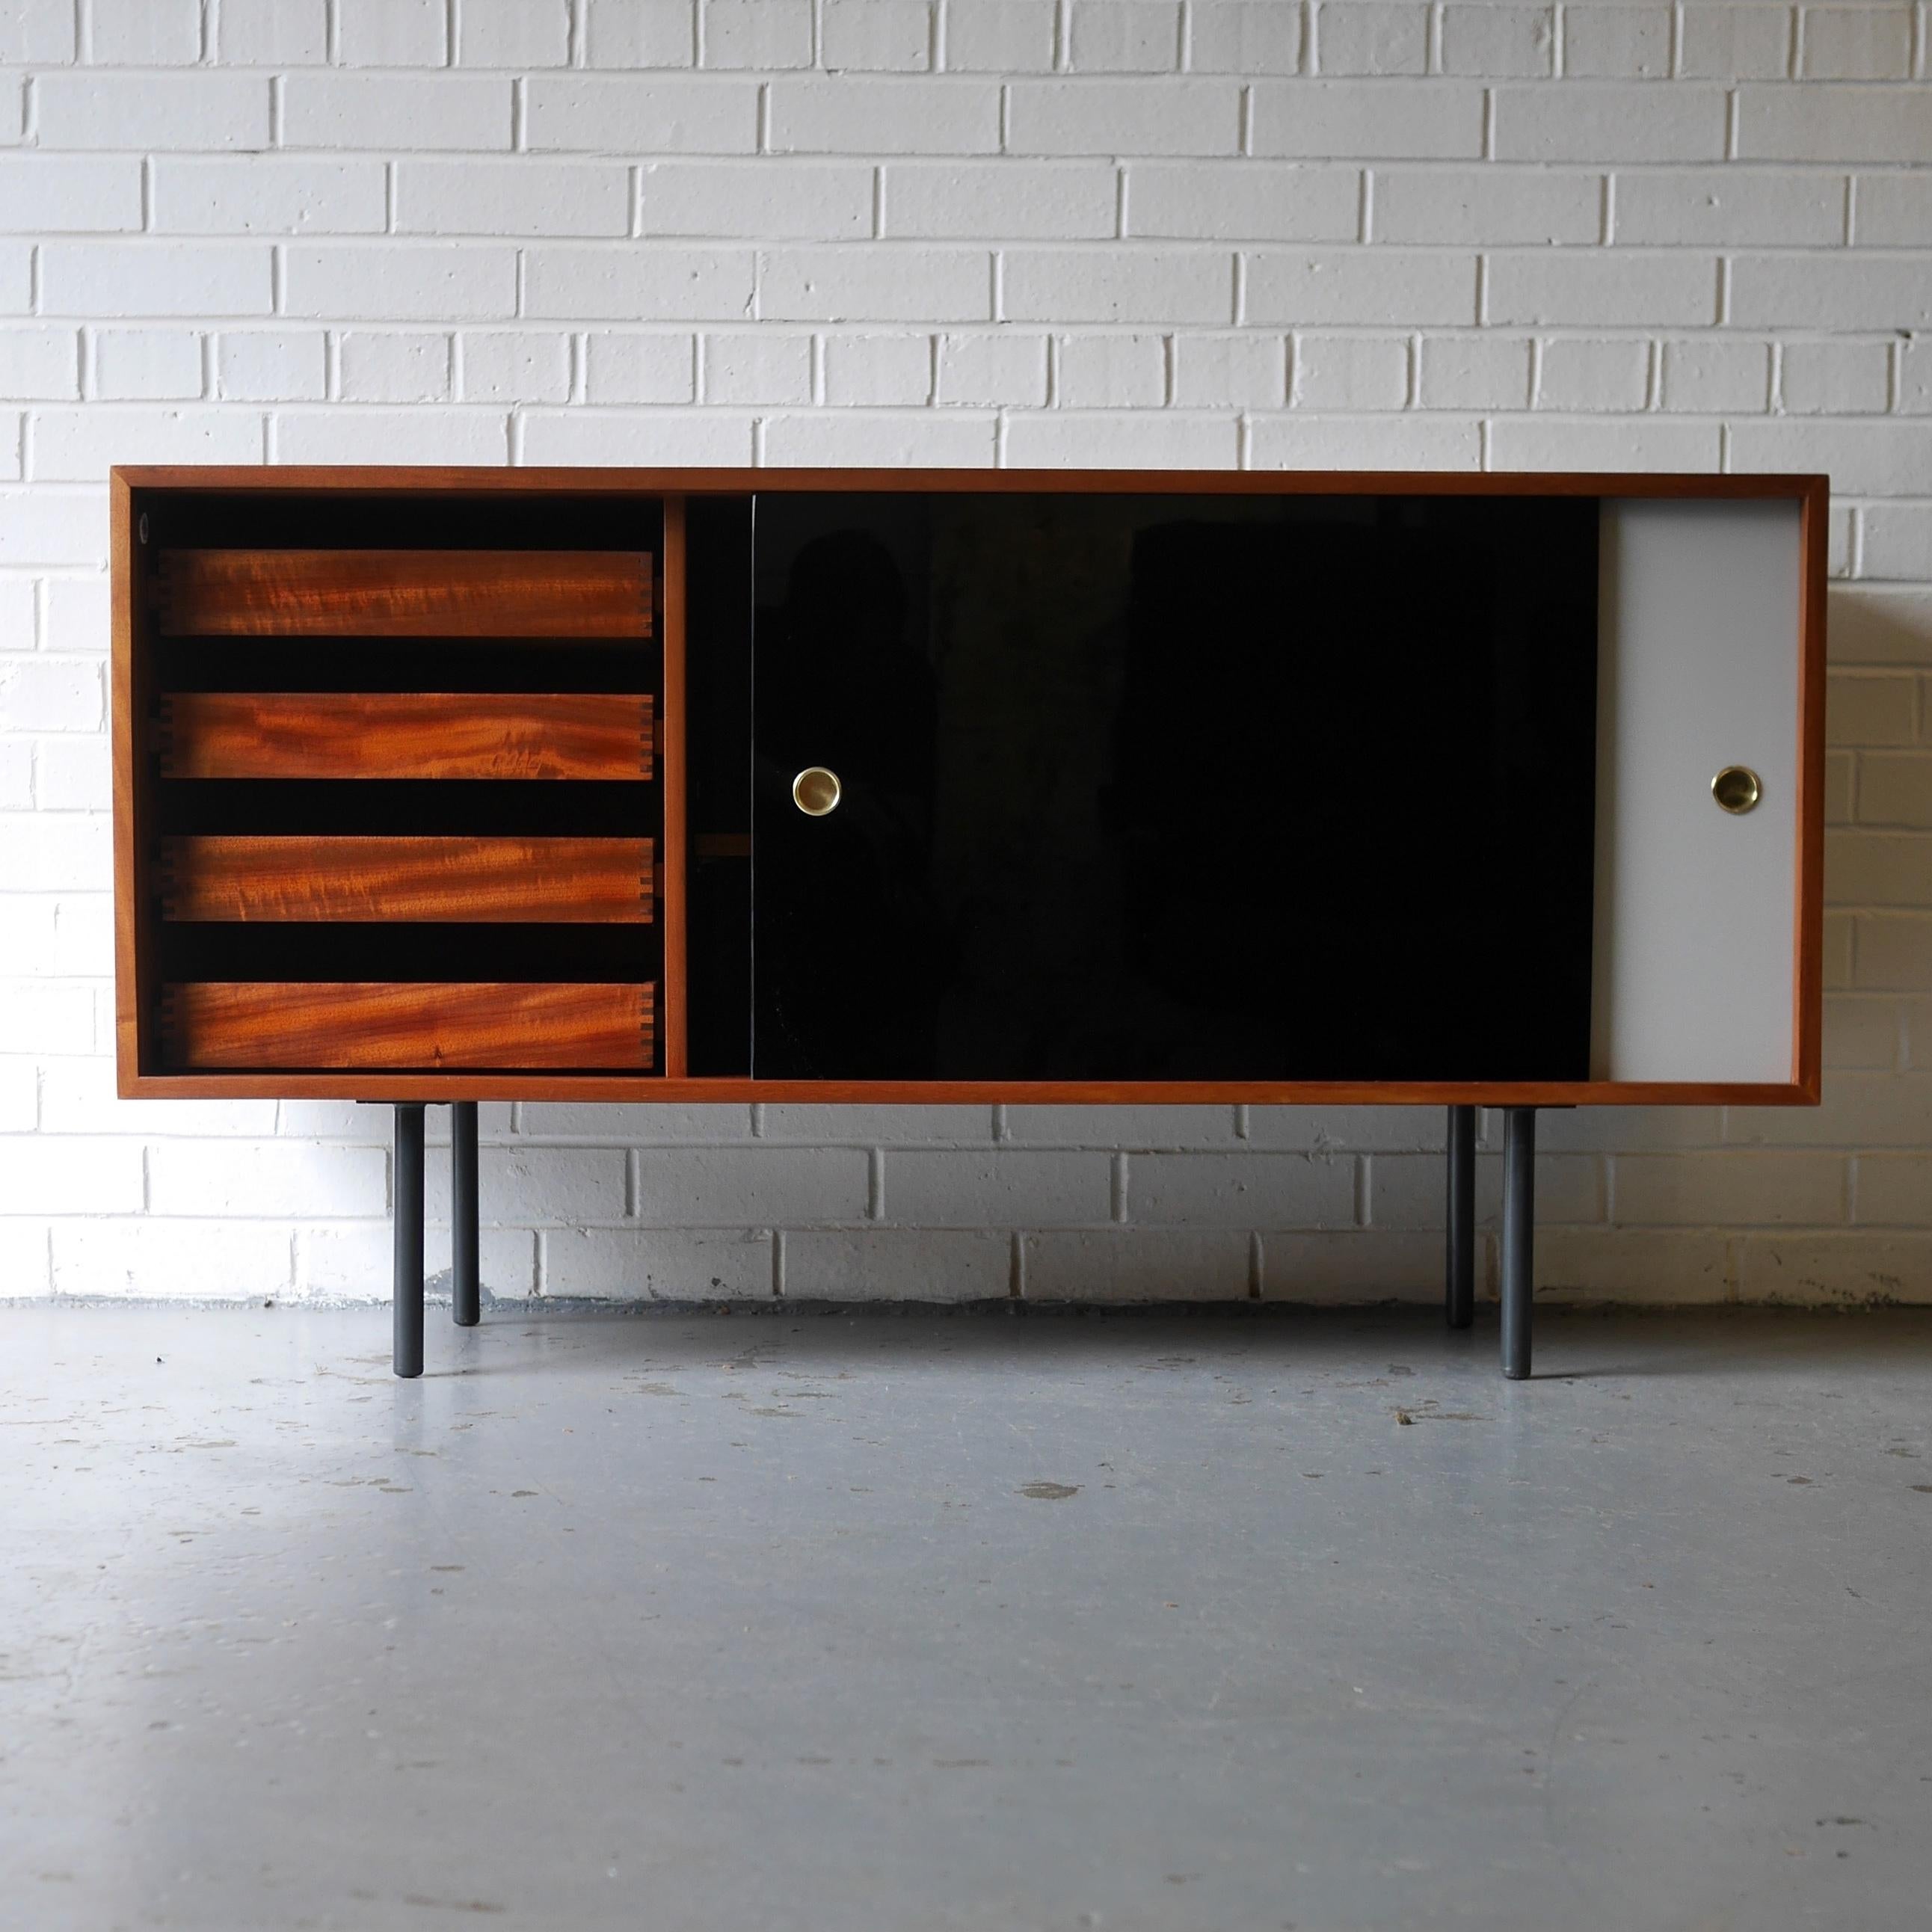 An incredibly rare and hugely collectable sideboard in outstanding restored condition. This Interplan unit L sideboard by Robin Day for Hille UK, features the most desirable configuration with a fully fitted interior of four solid mahogany drawers